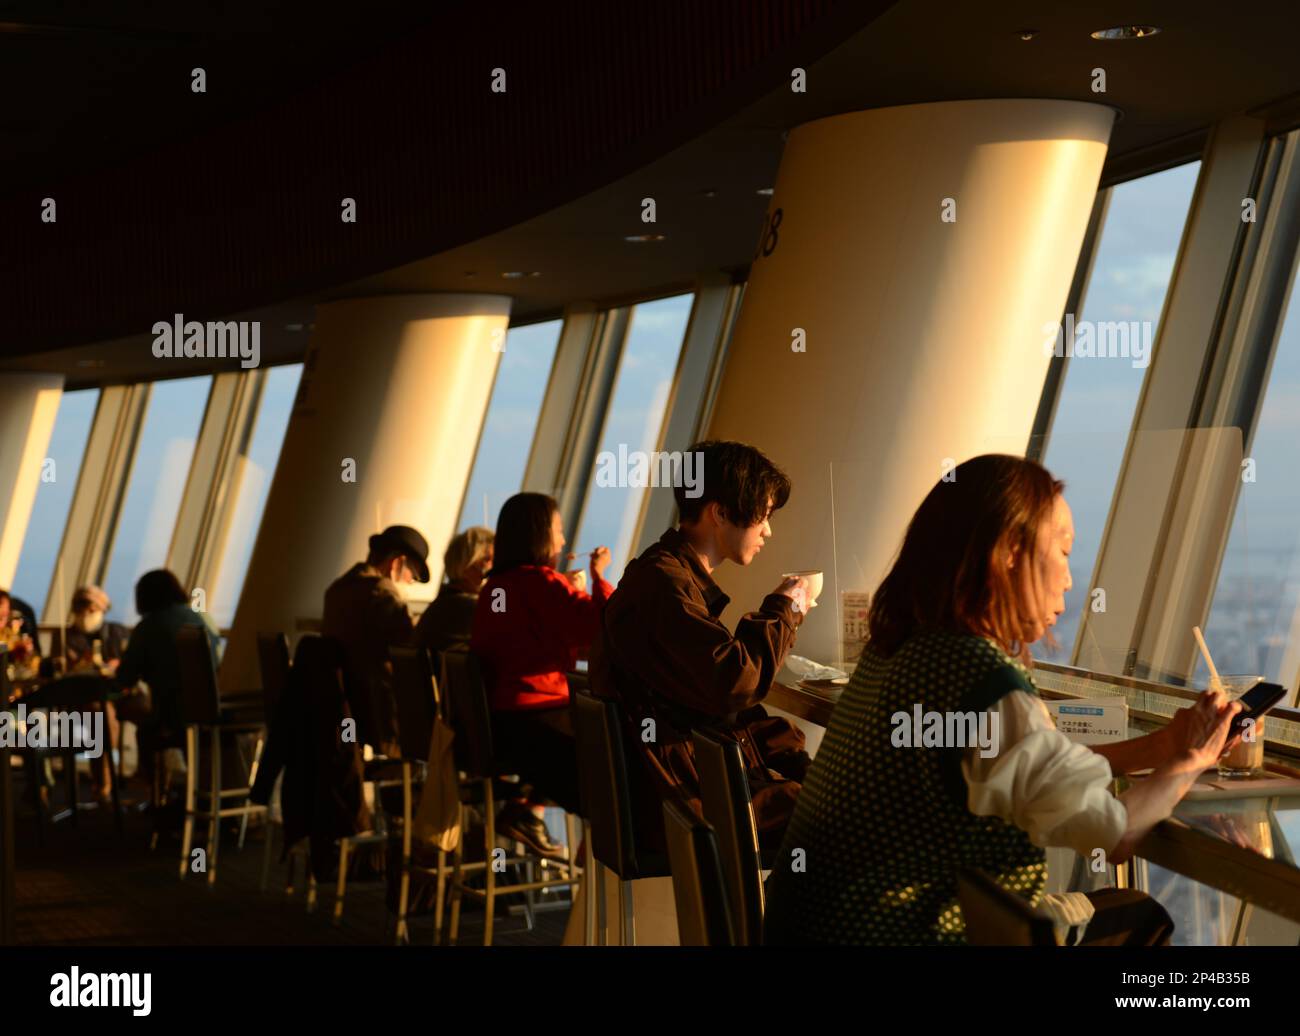 Tourist enjoying the views from the top of the Skytree in Sumida-City, Tokyo, Japan. Stock Photo